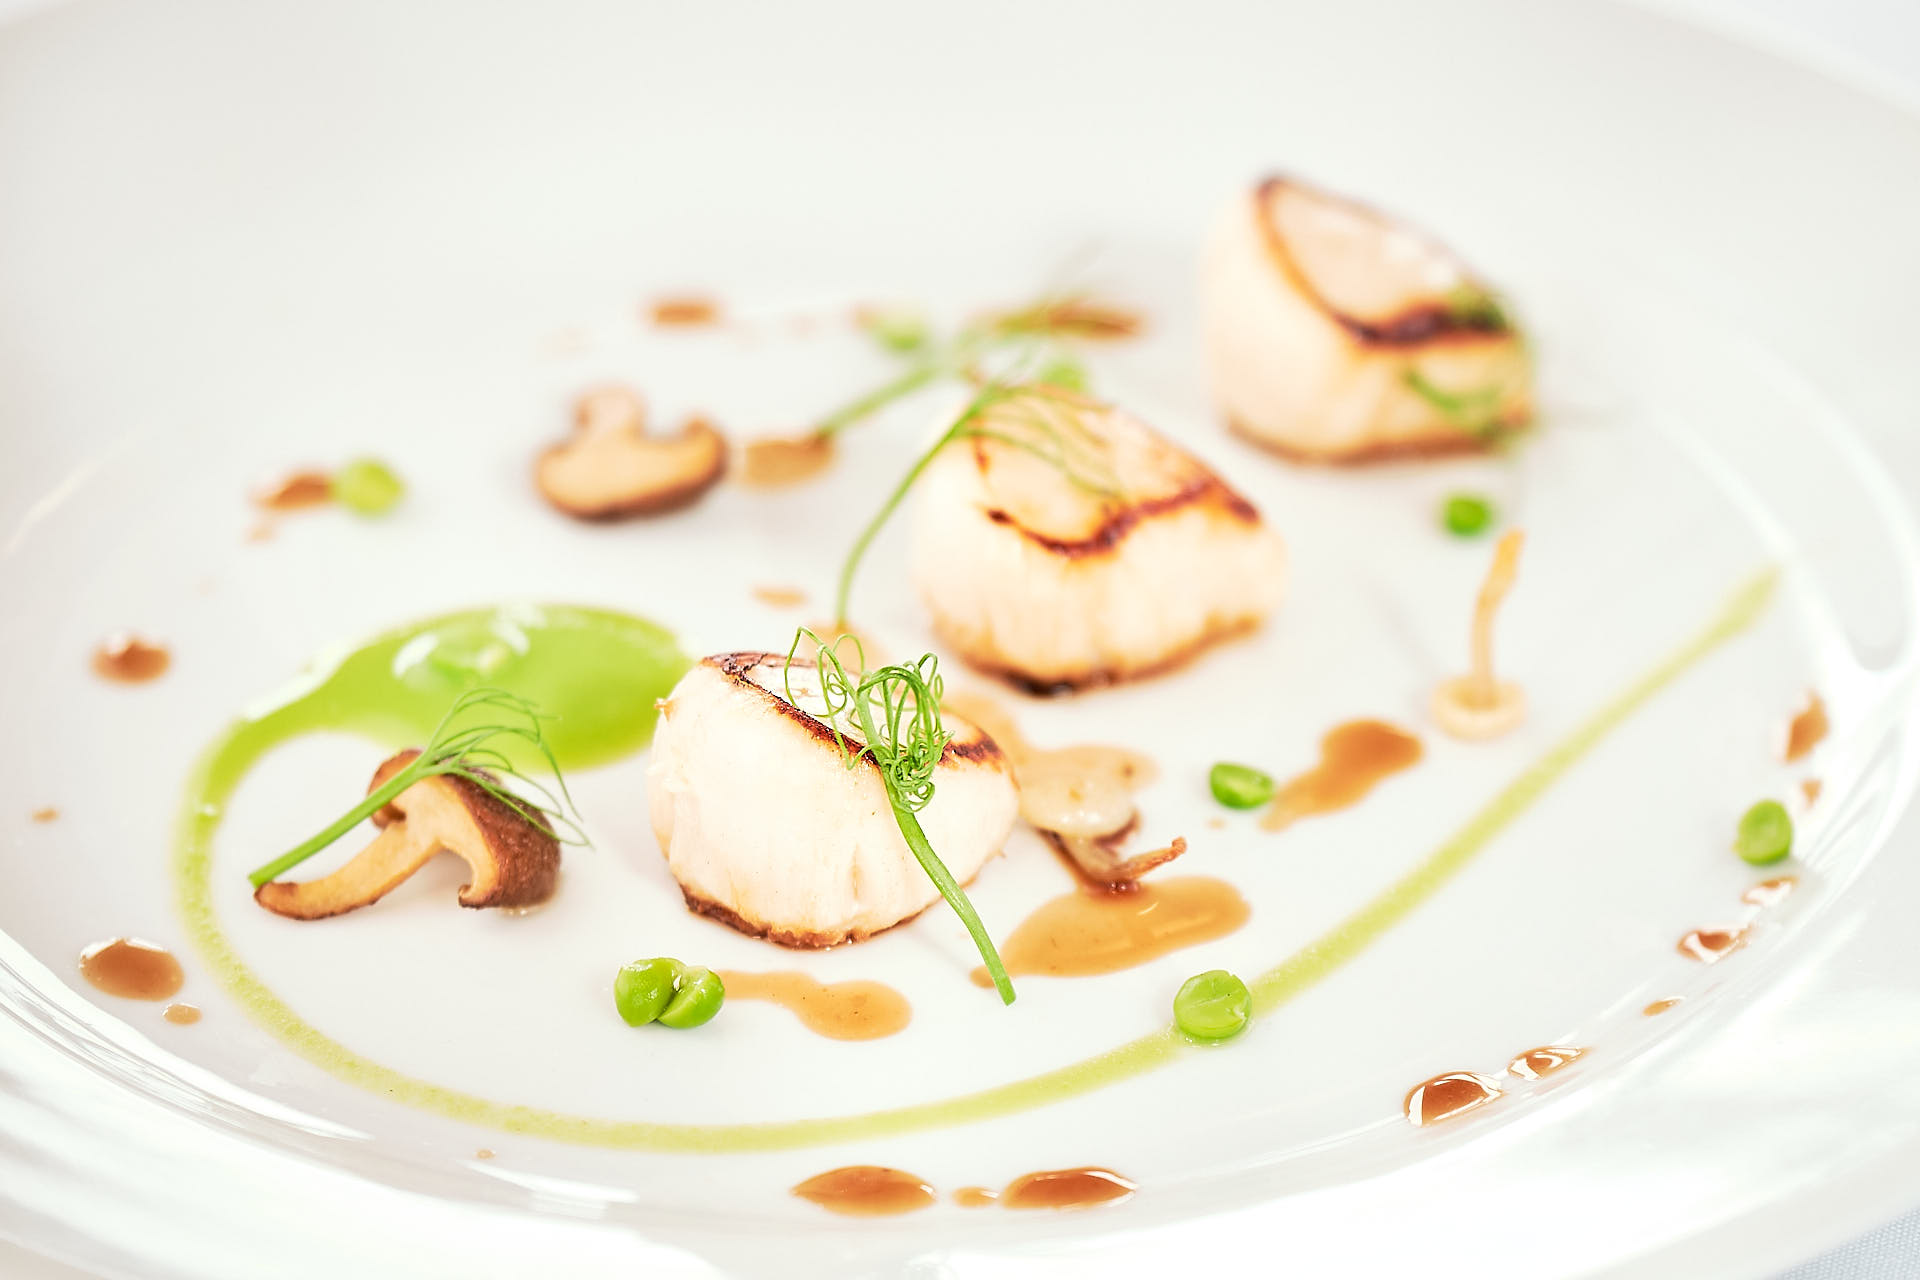 Scallops and pea shoots on a plain white plate.